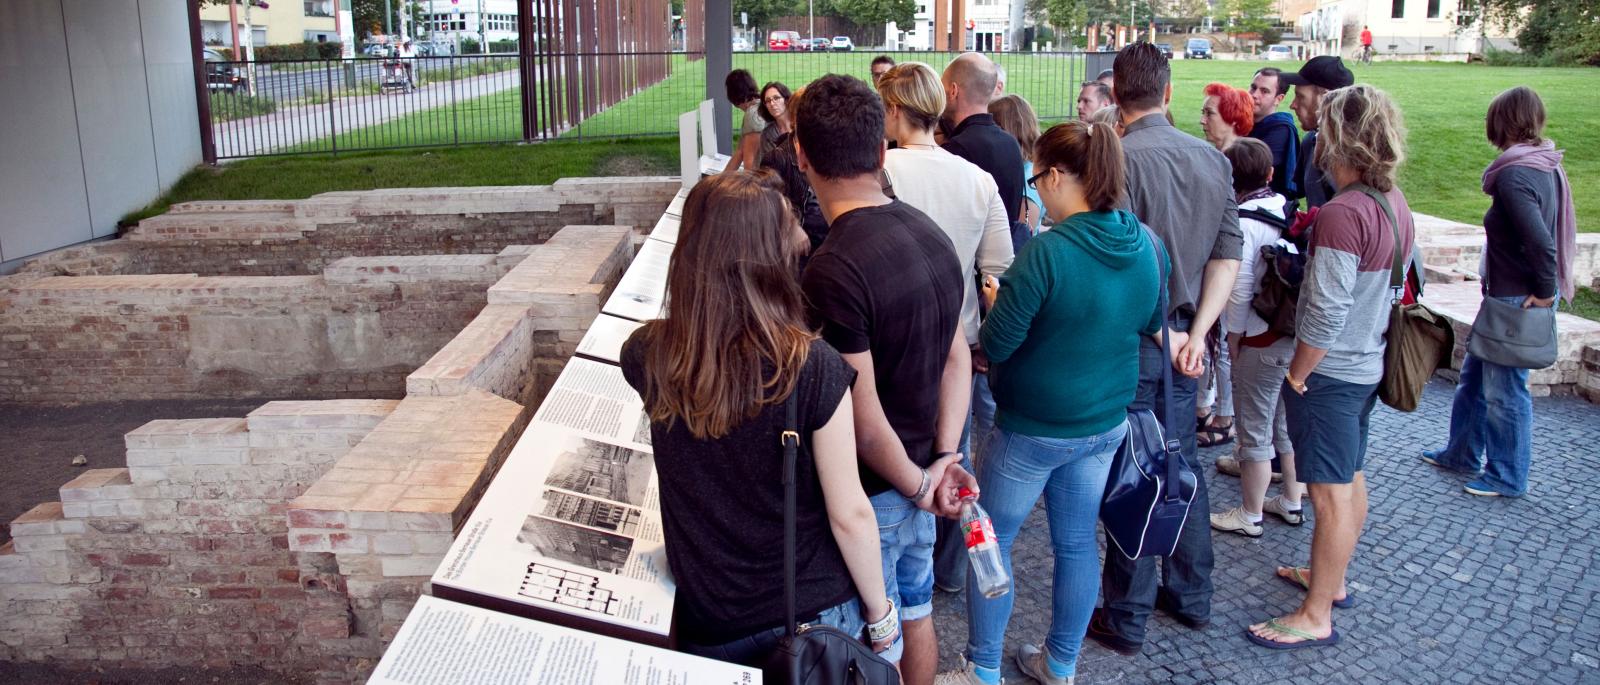 A group of visitors at the Berlin Wall Memorial inspects the remains of the border house